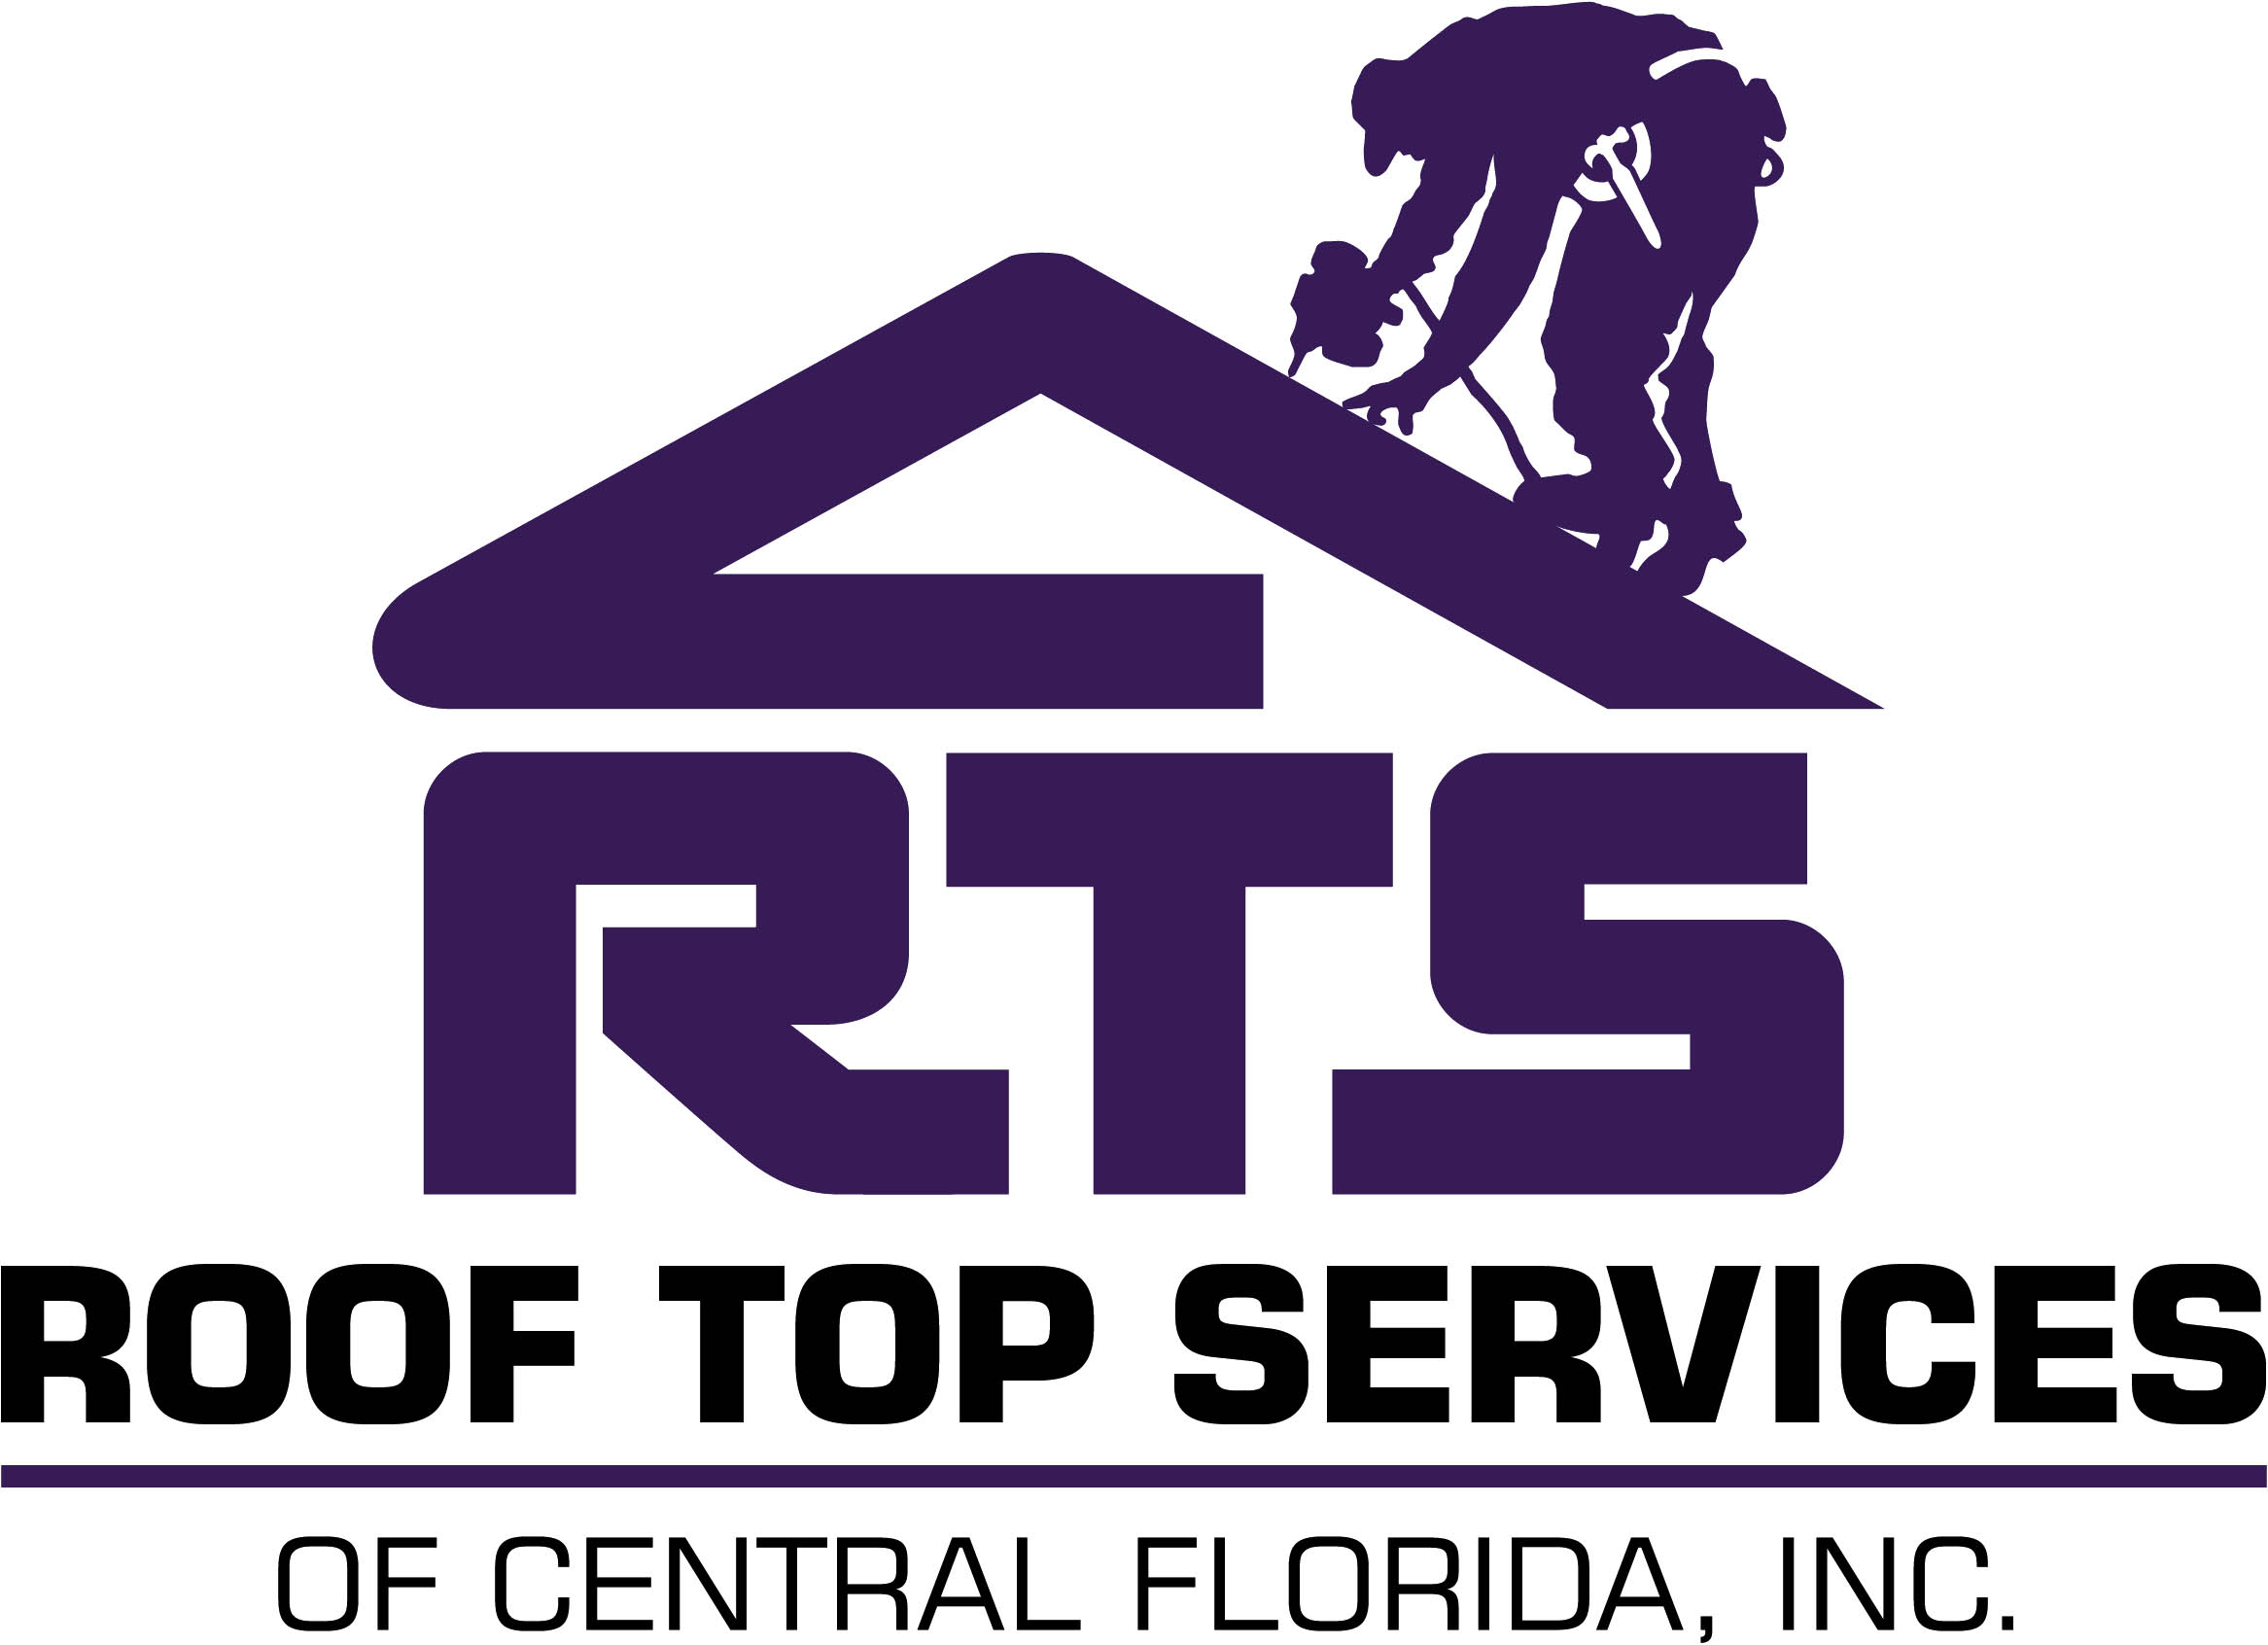 SIGN ON BONUS FOR EXPERIENCED ROOFERS!